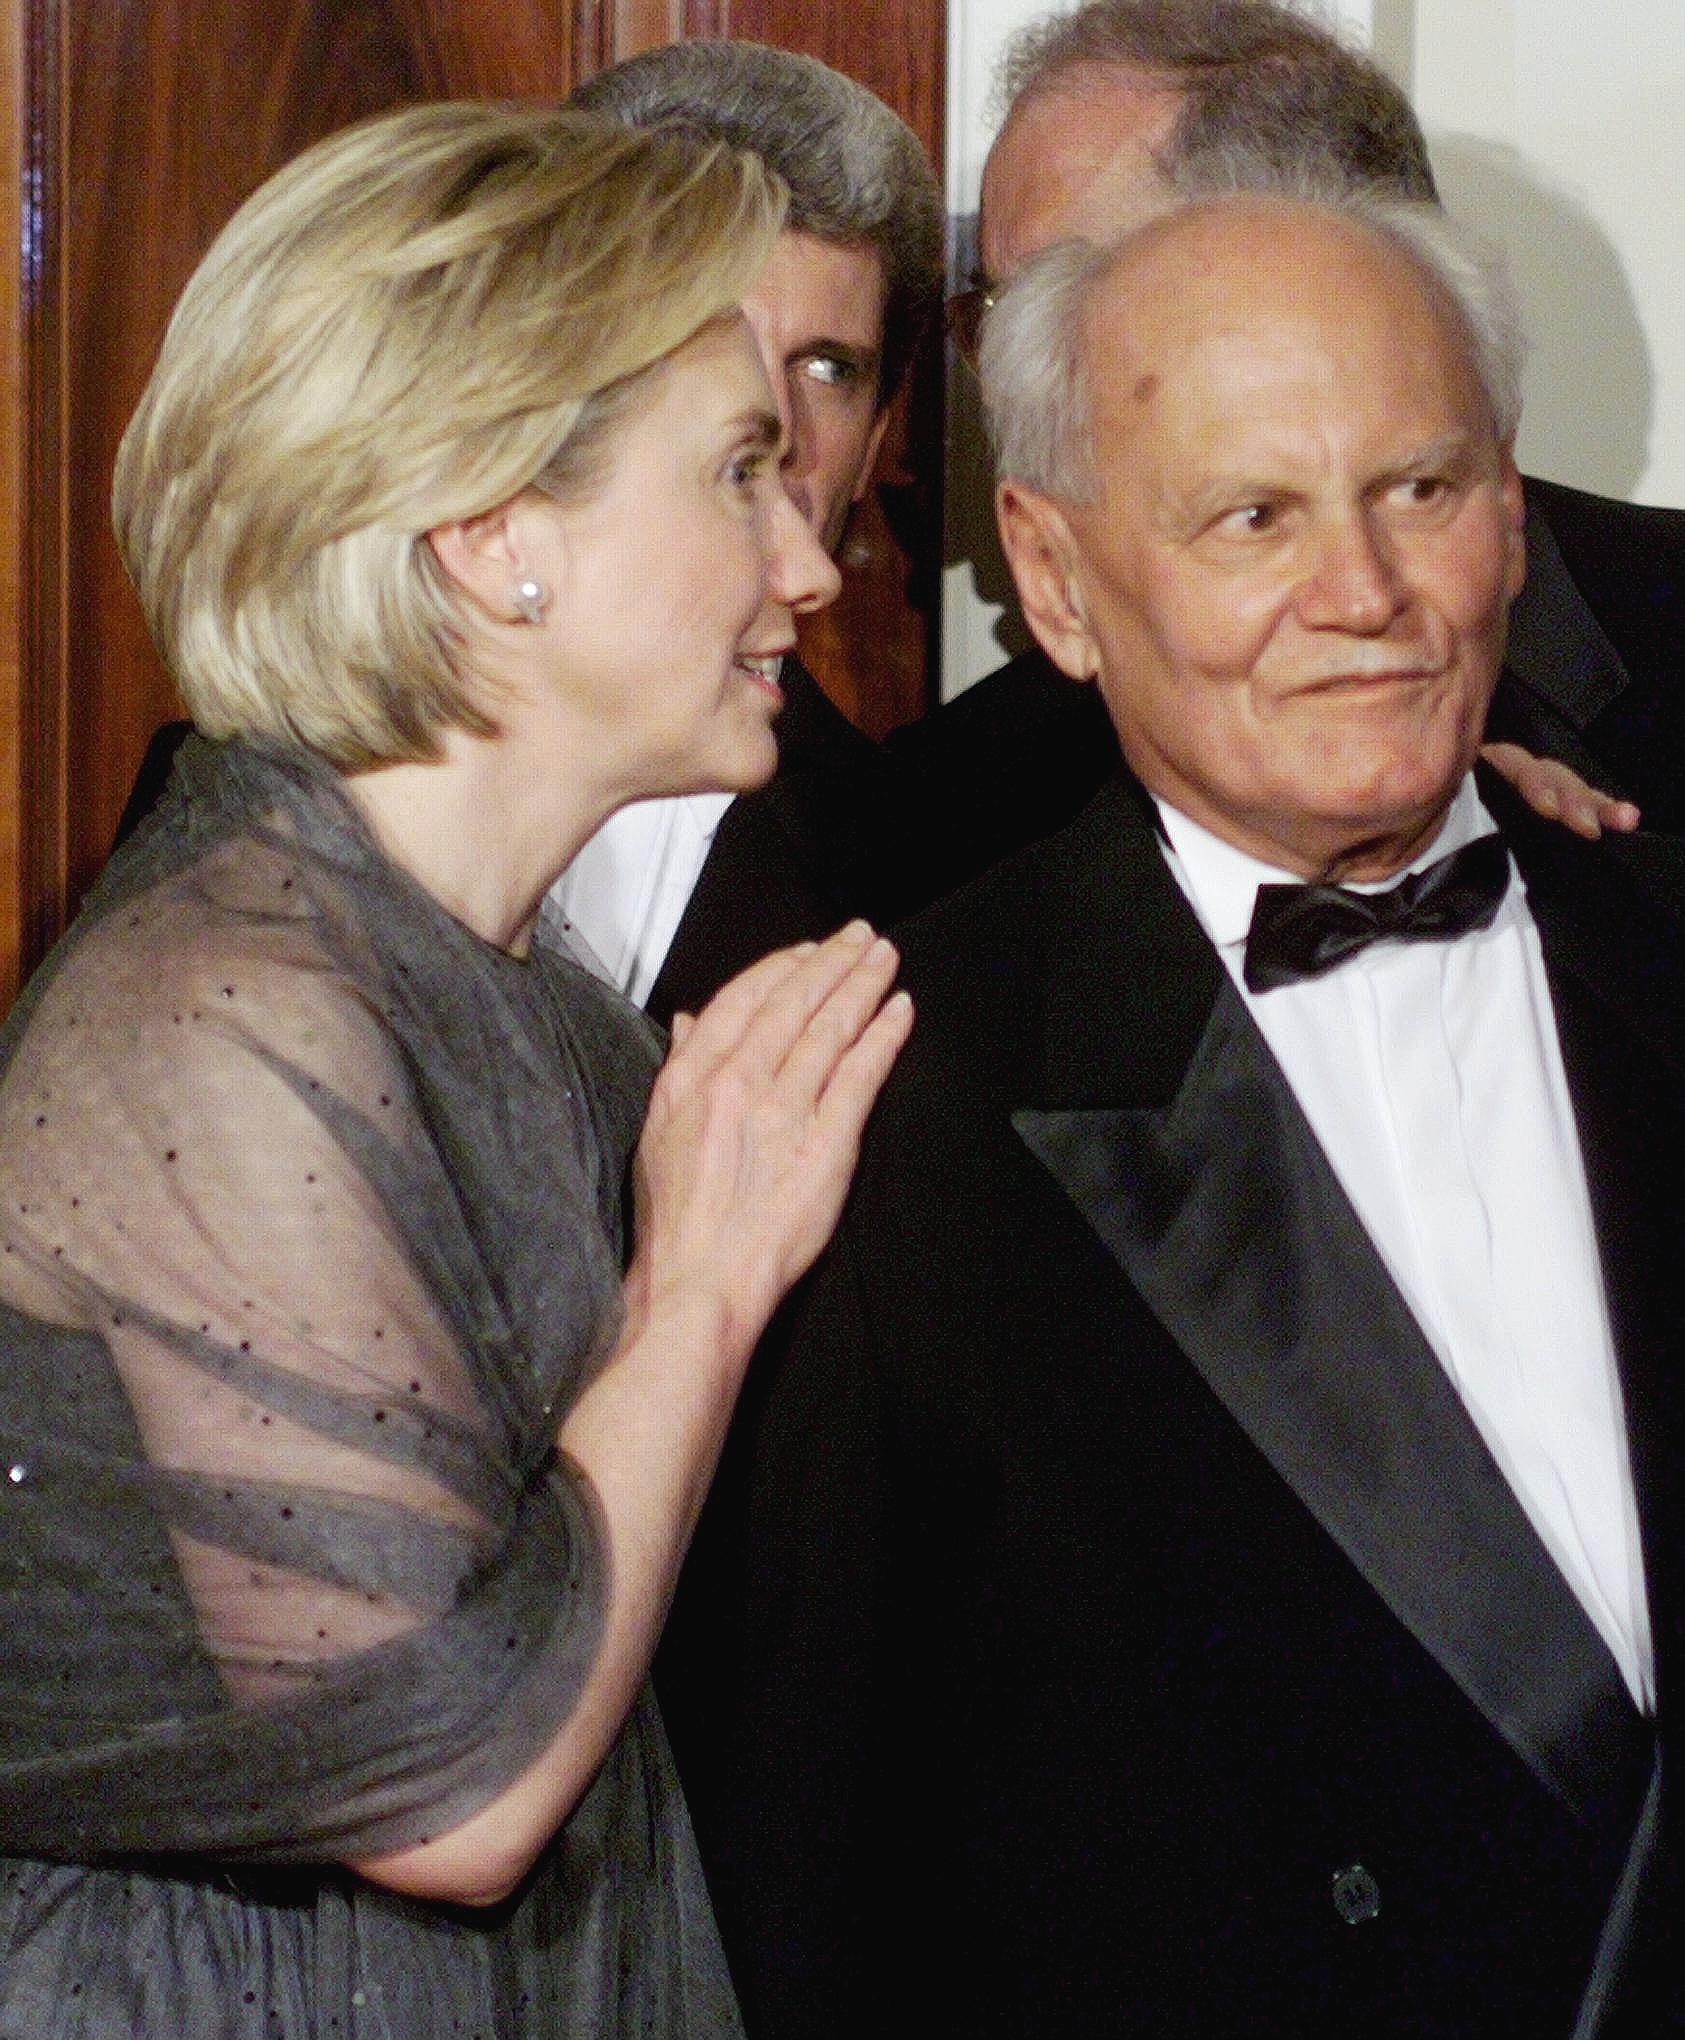 US First Lady Hillary Clinton (L) talks with Hungarian President Arpad Goncz 08 June, 1999, before a state dinner at the White House in Goncz's honor. Goncz was also honored at a White House arrival ceremony earlier. (ELECTRONIC IMAGE) AFP PHOTO Joyce NALTCHAYAN